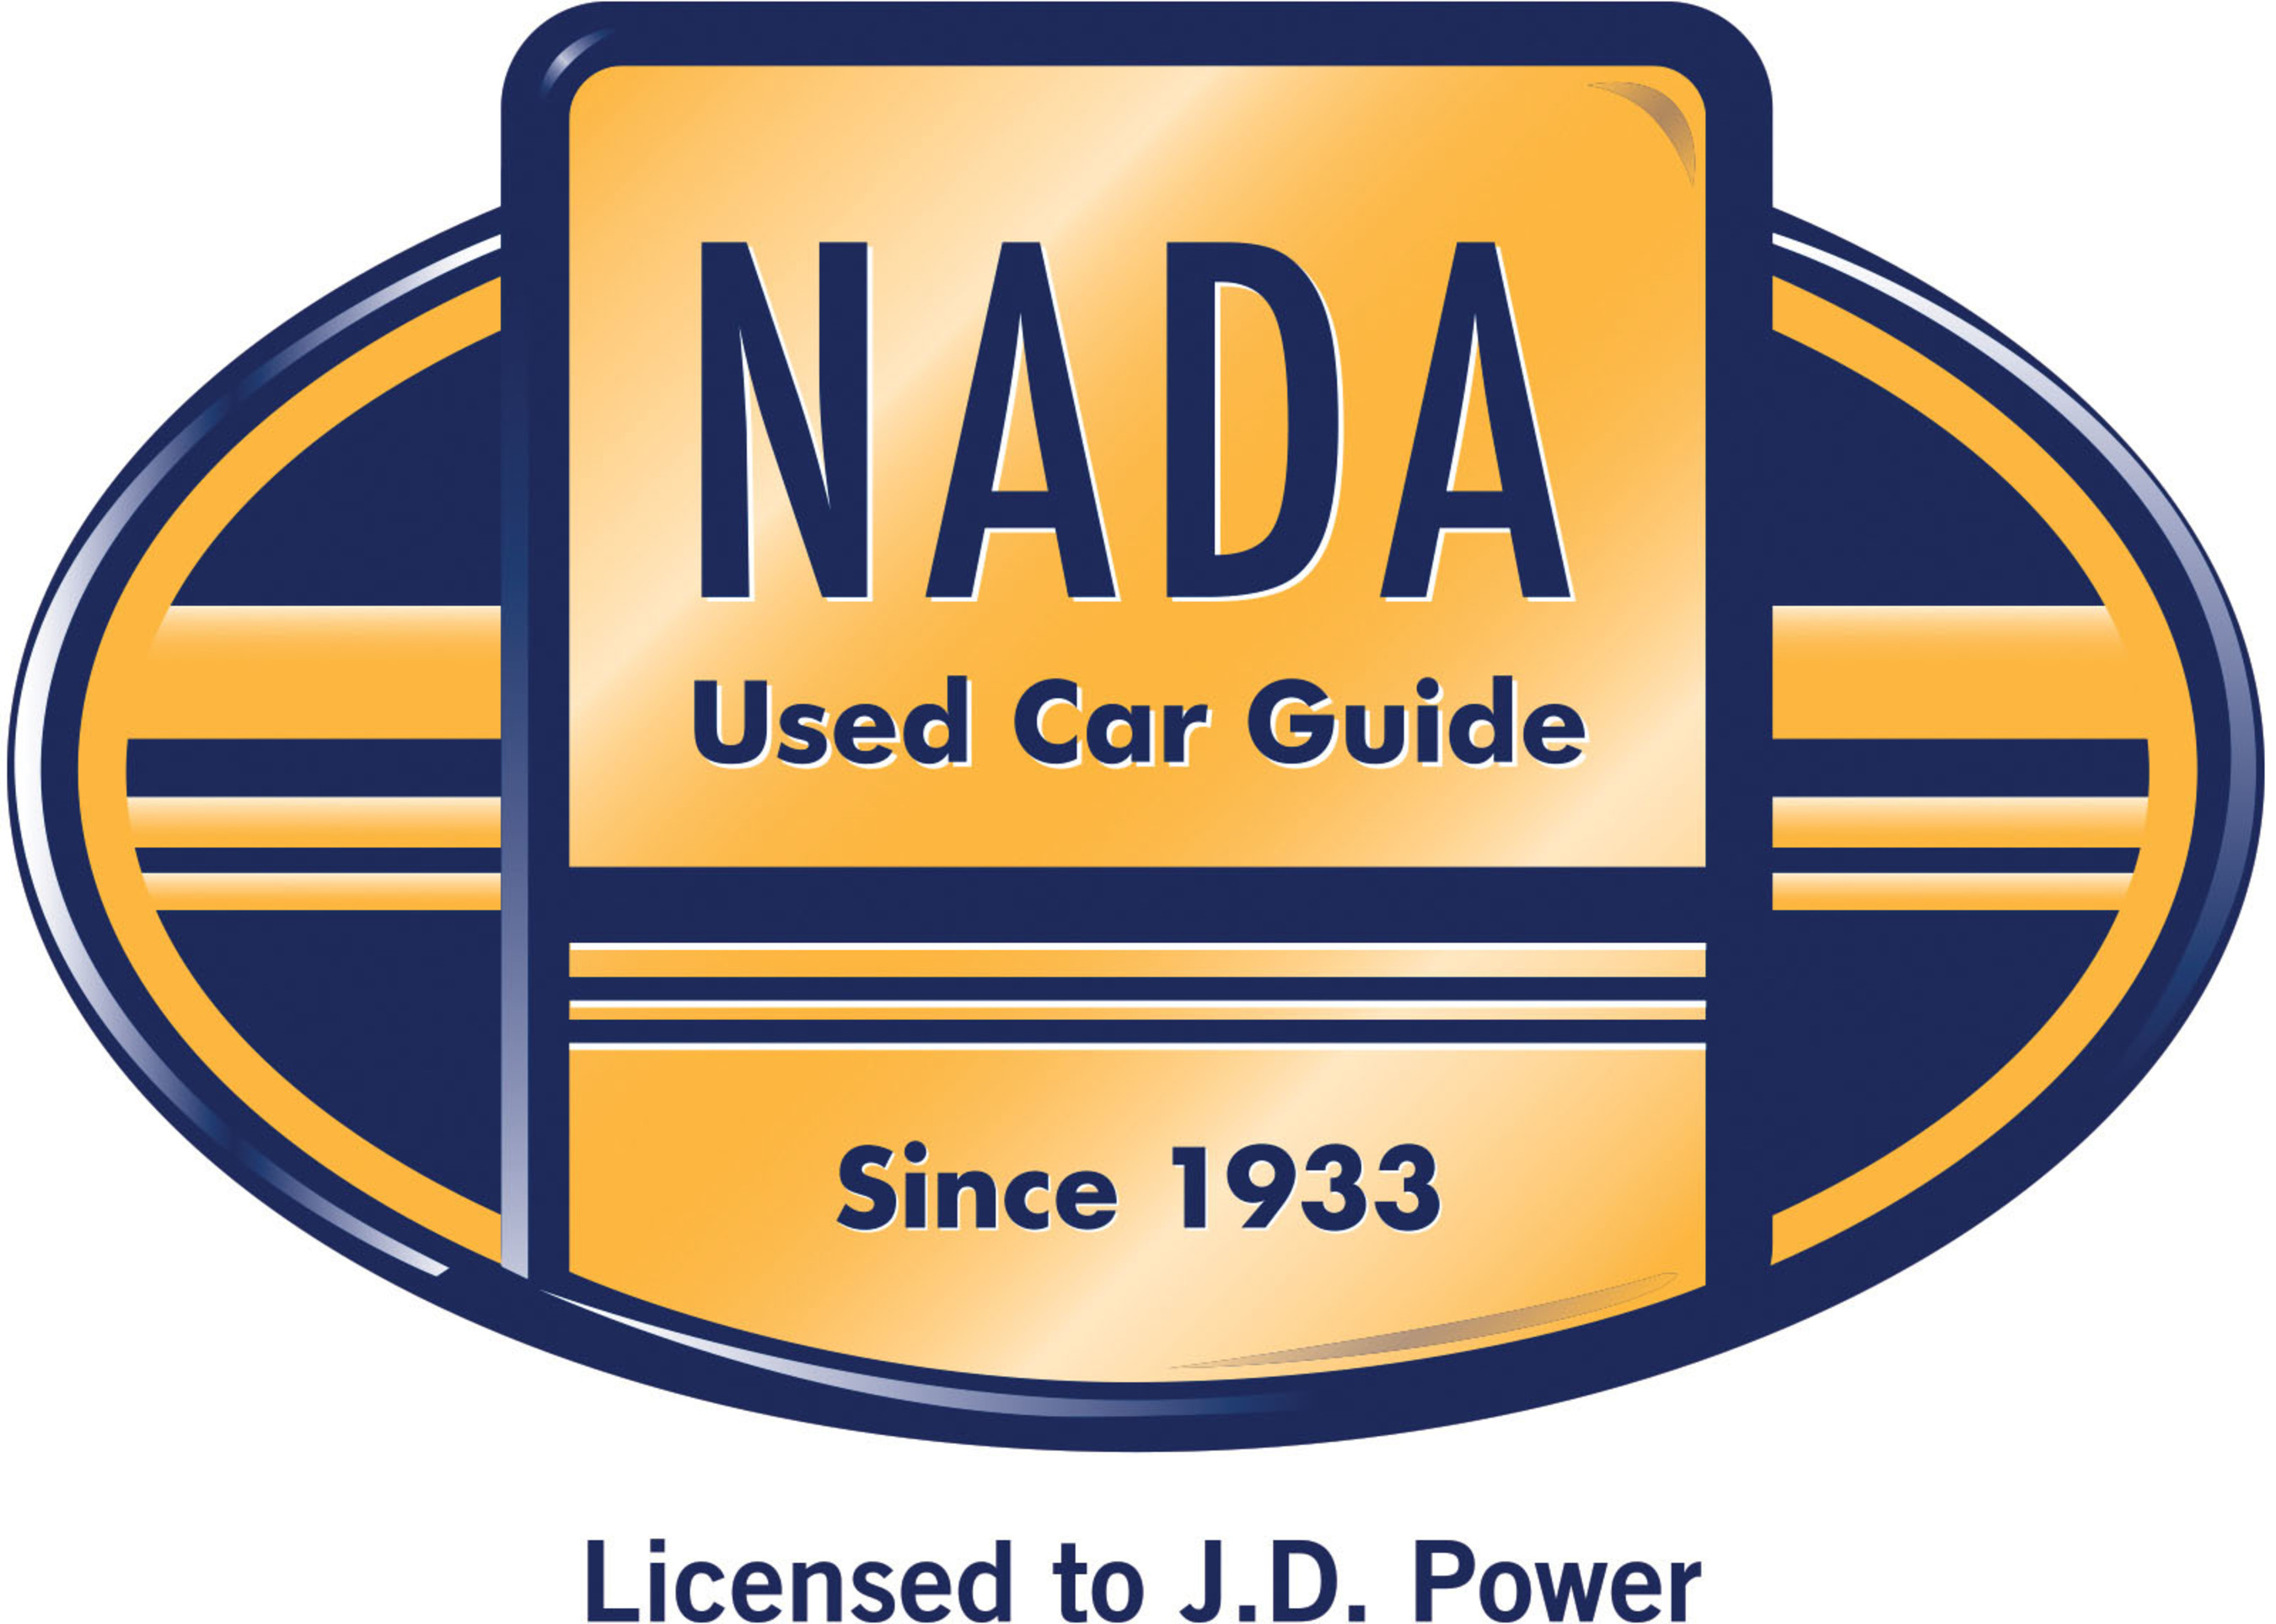 NADA Used Car Guide(R) and its logo are registered trademarks of National Automobile Dealers Association, used under license by J.D. Power and Associates.